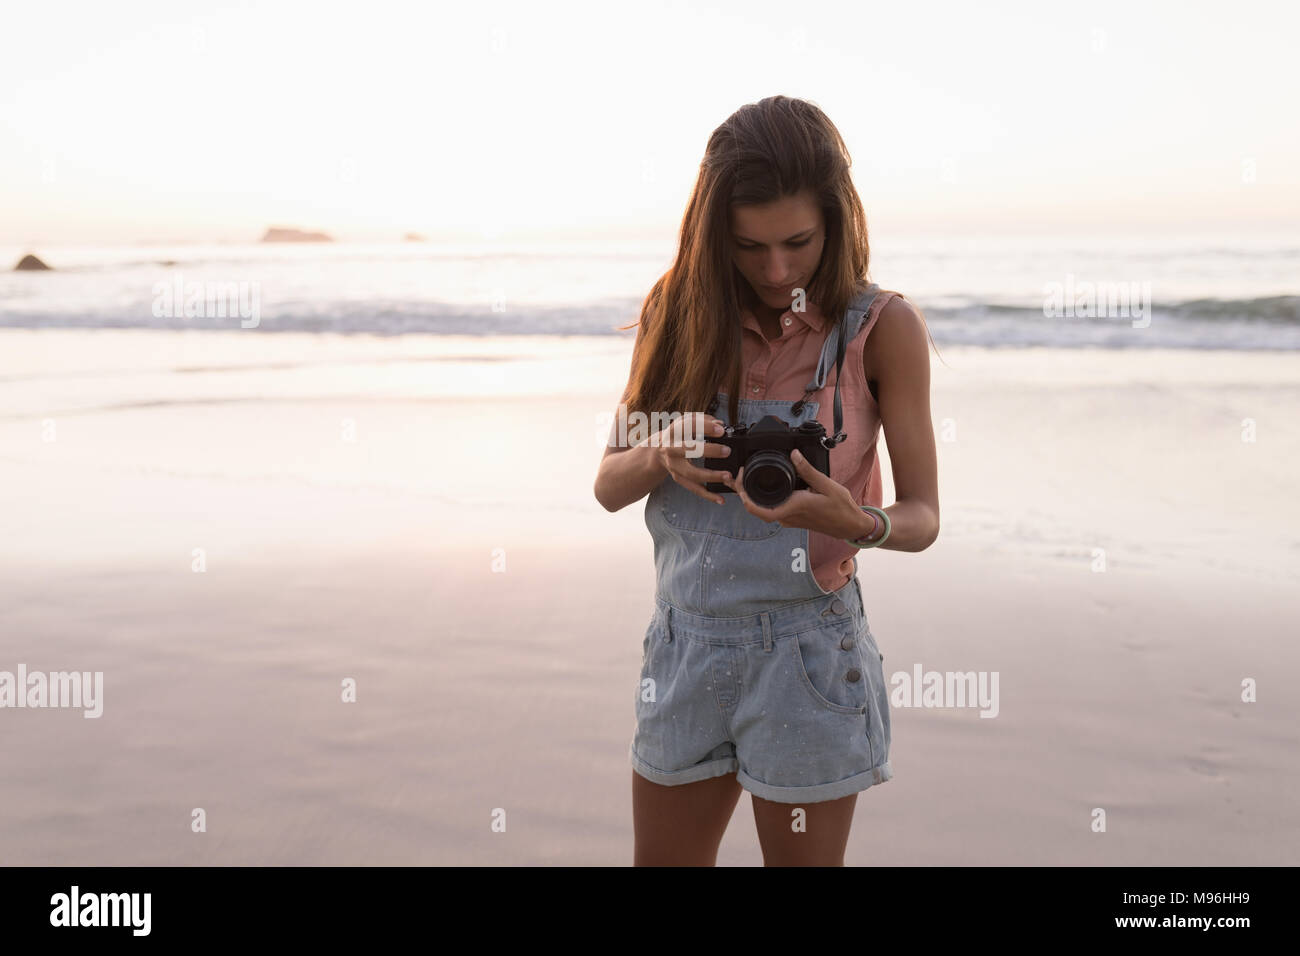 Woman holding camera in the beach Stock Photo